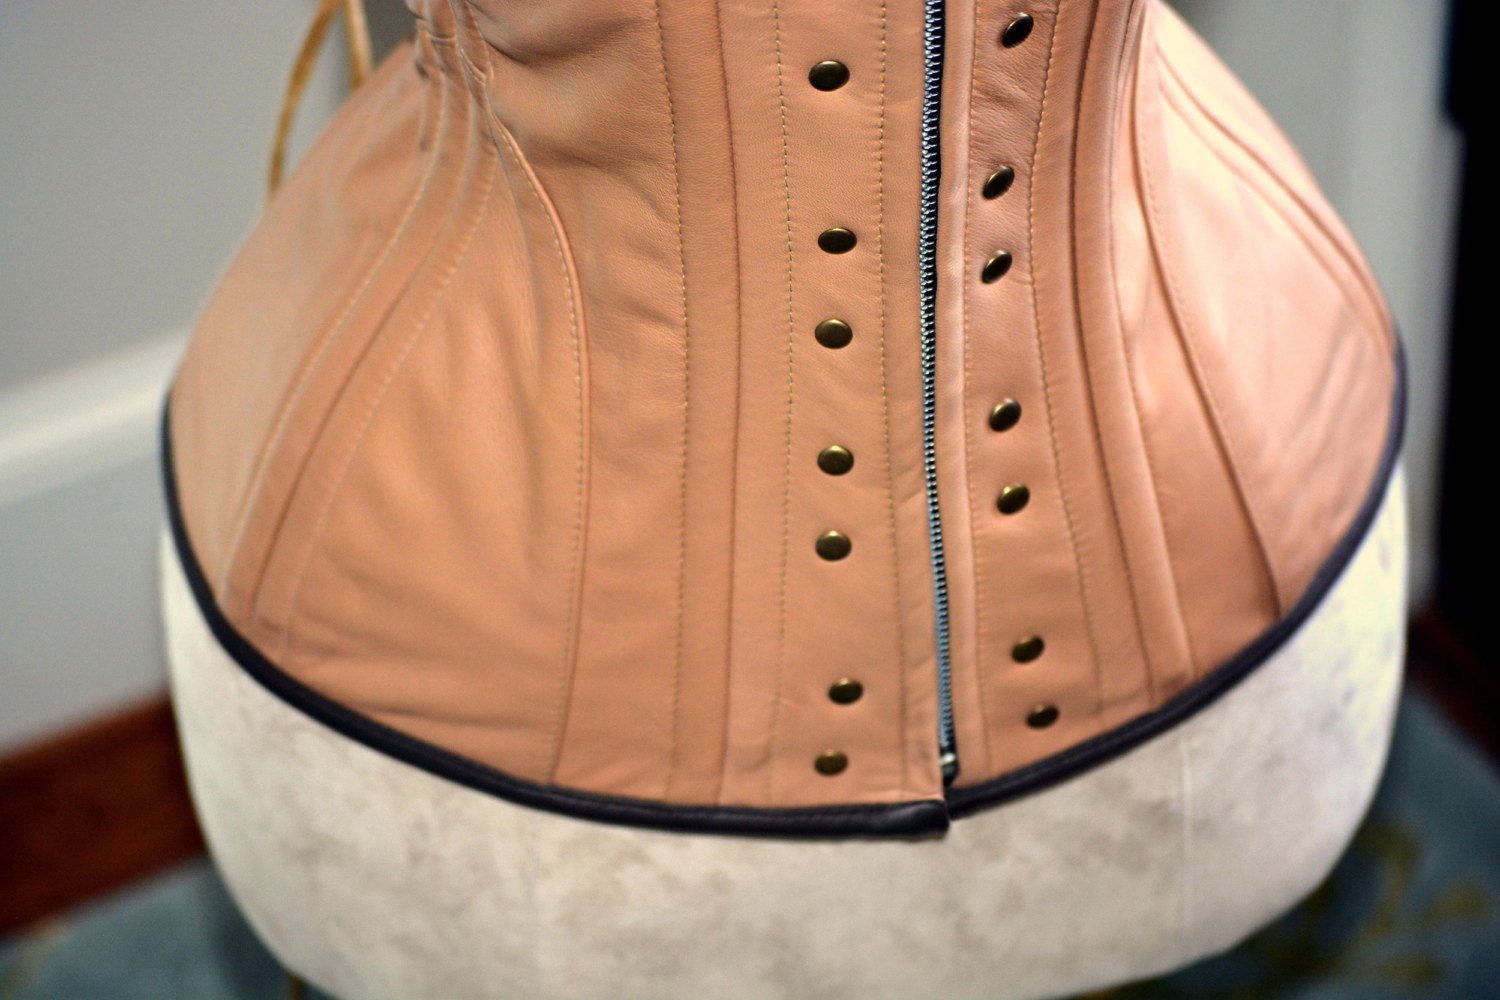 Cosplay waist corset belt from high quality leather on steel bones